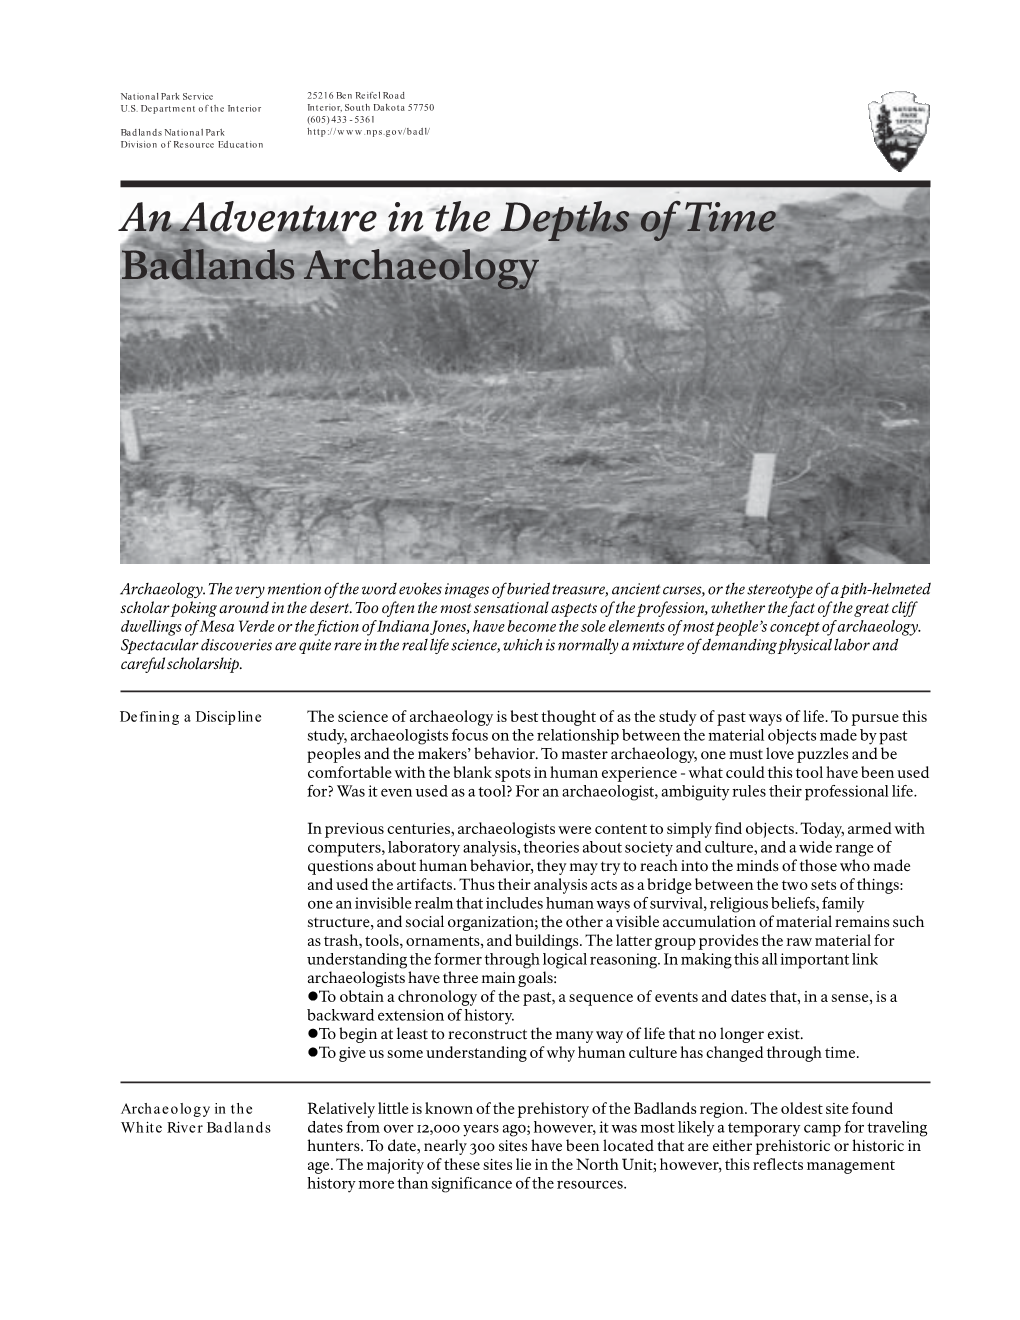 An Adventure in the Depths of Time Badlands Archaeology